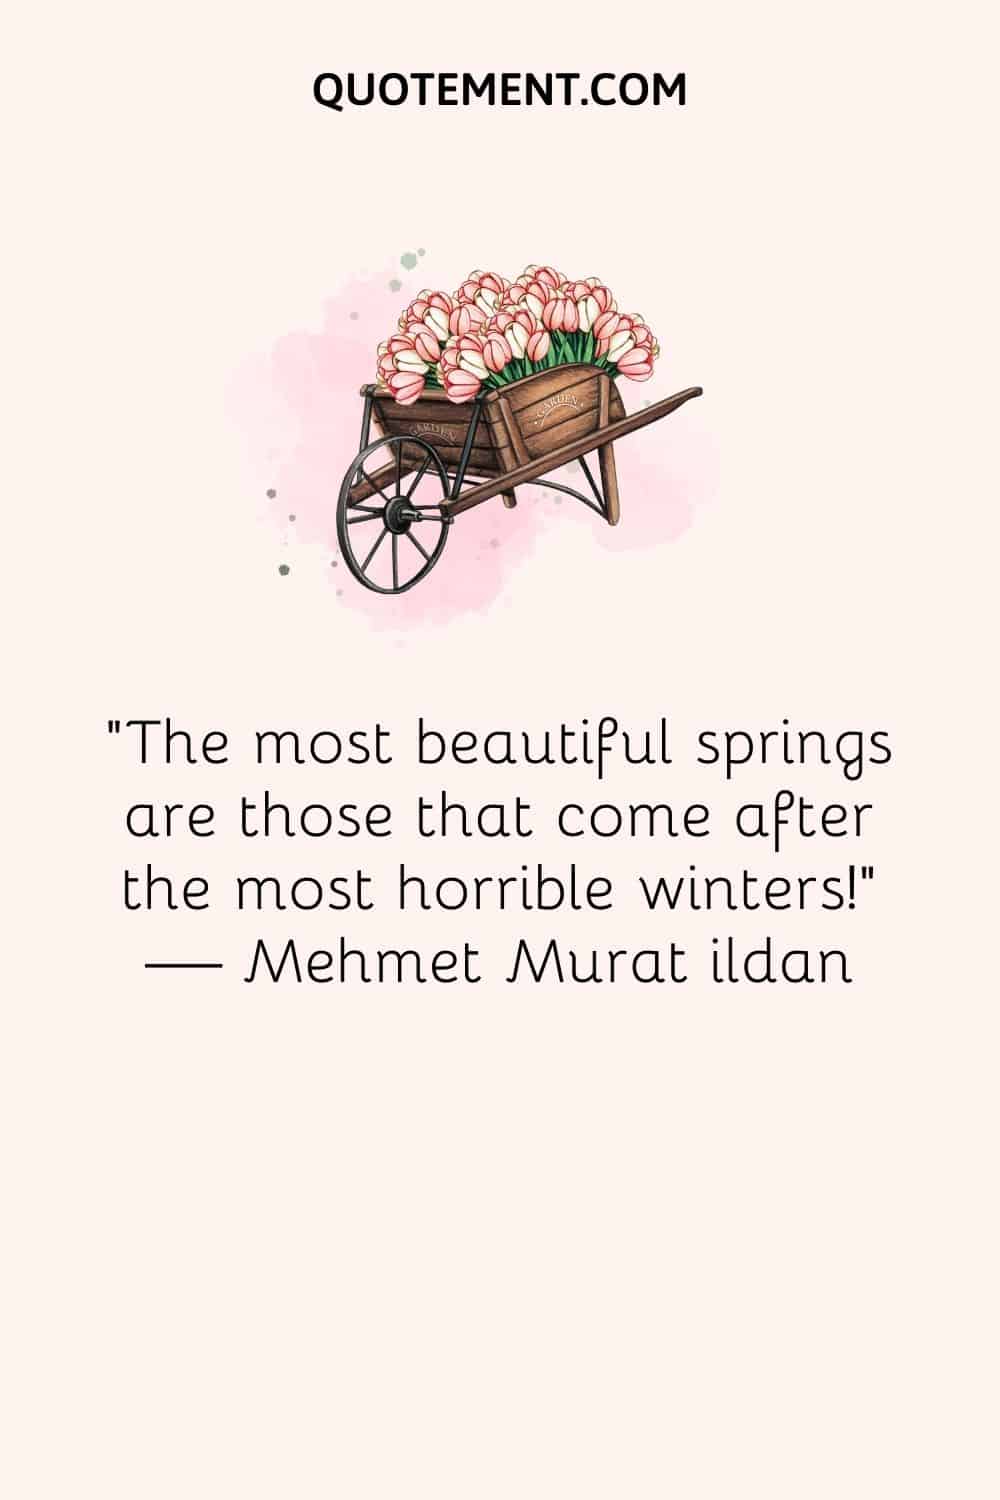 The most beautiful springs are those that come after the most horrible winters